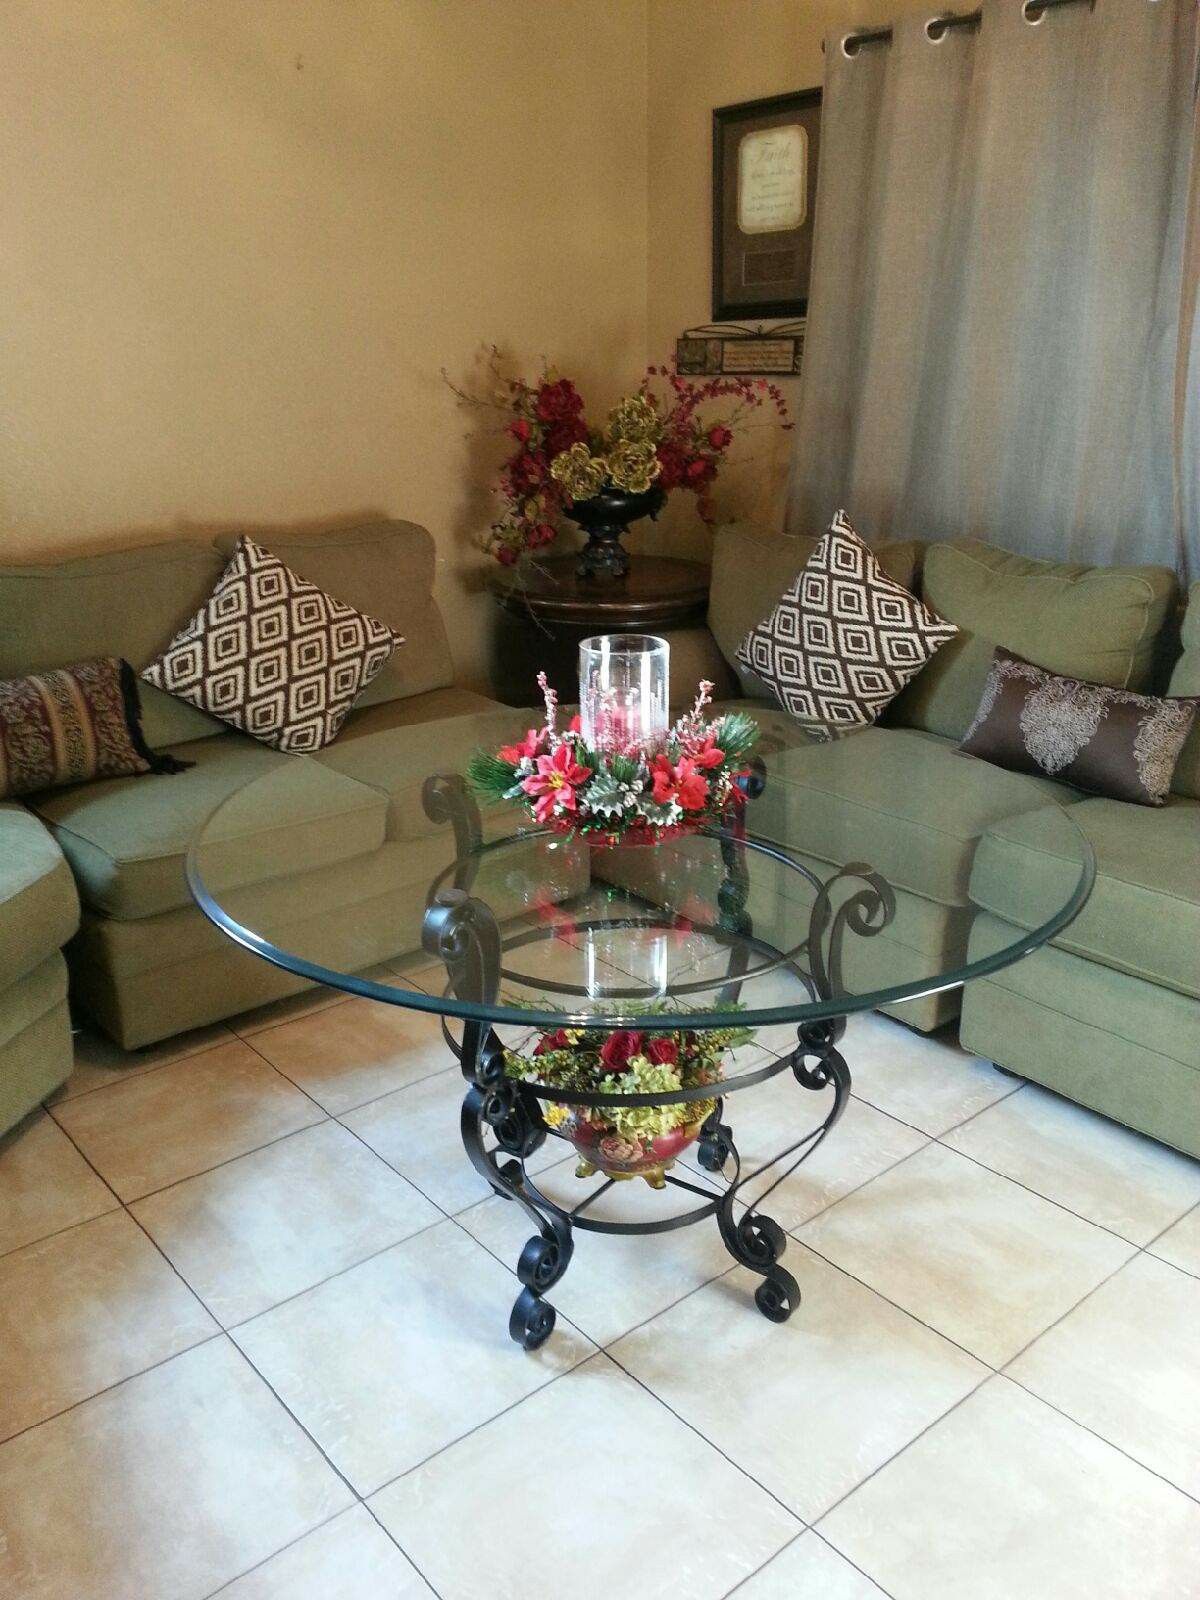 *****GLASS ROUND TABLE*****